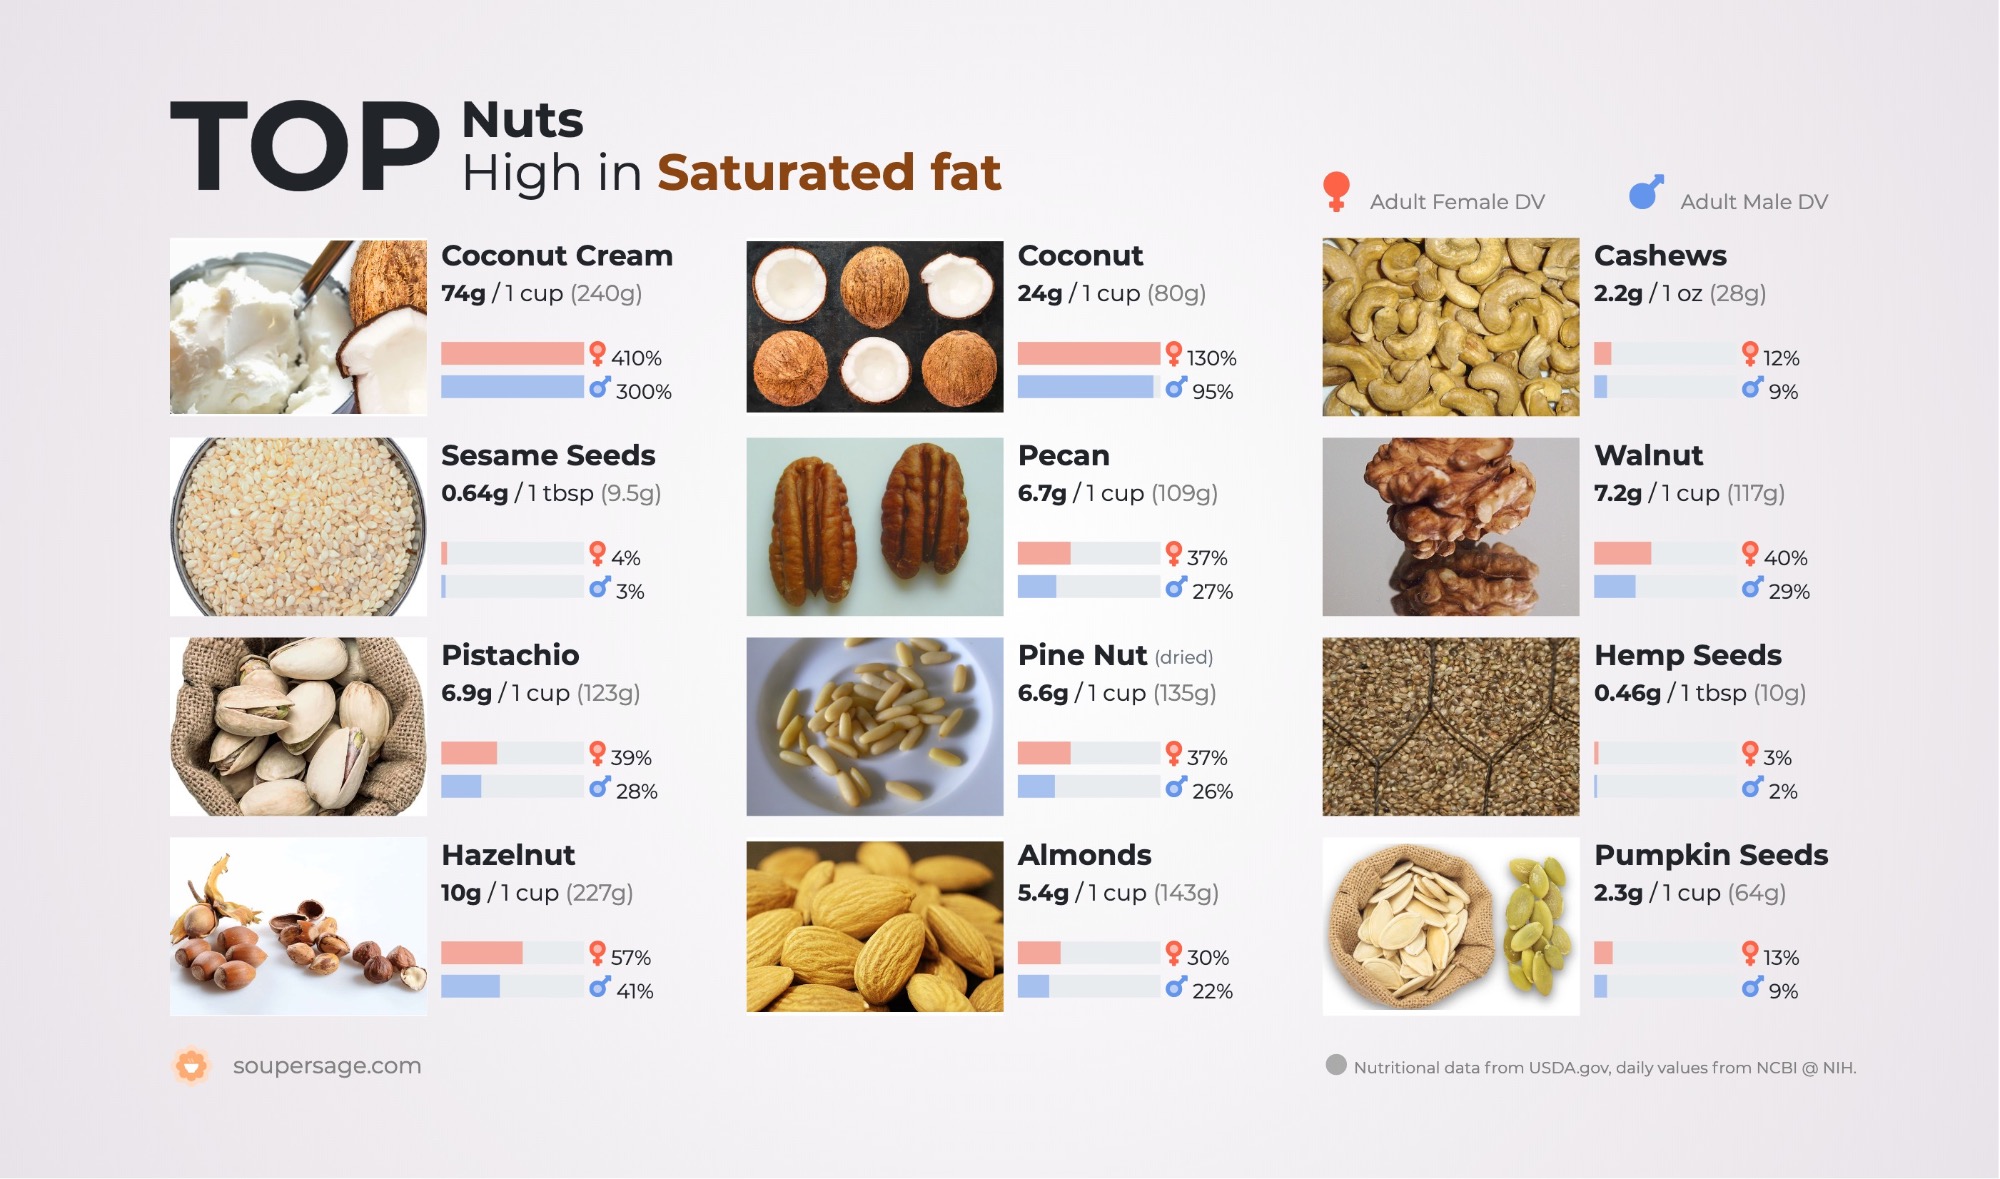 image of Top Nuts High in Saturated fat